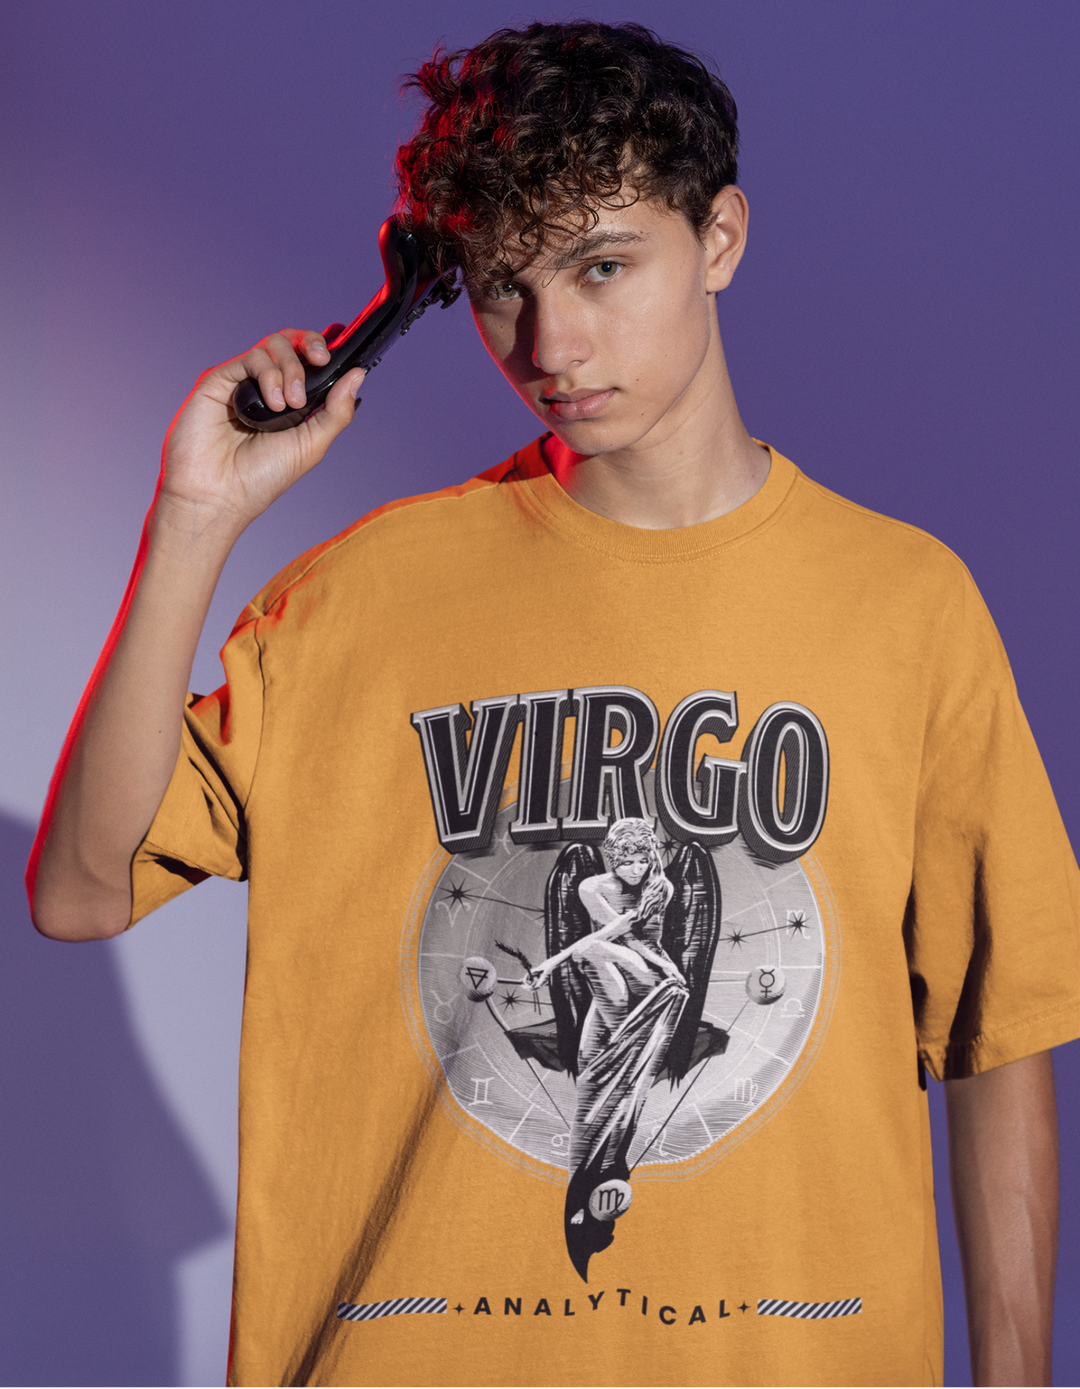 Virgo: The Perfectionist of the Cosmos